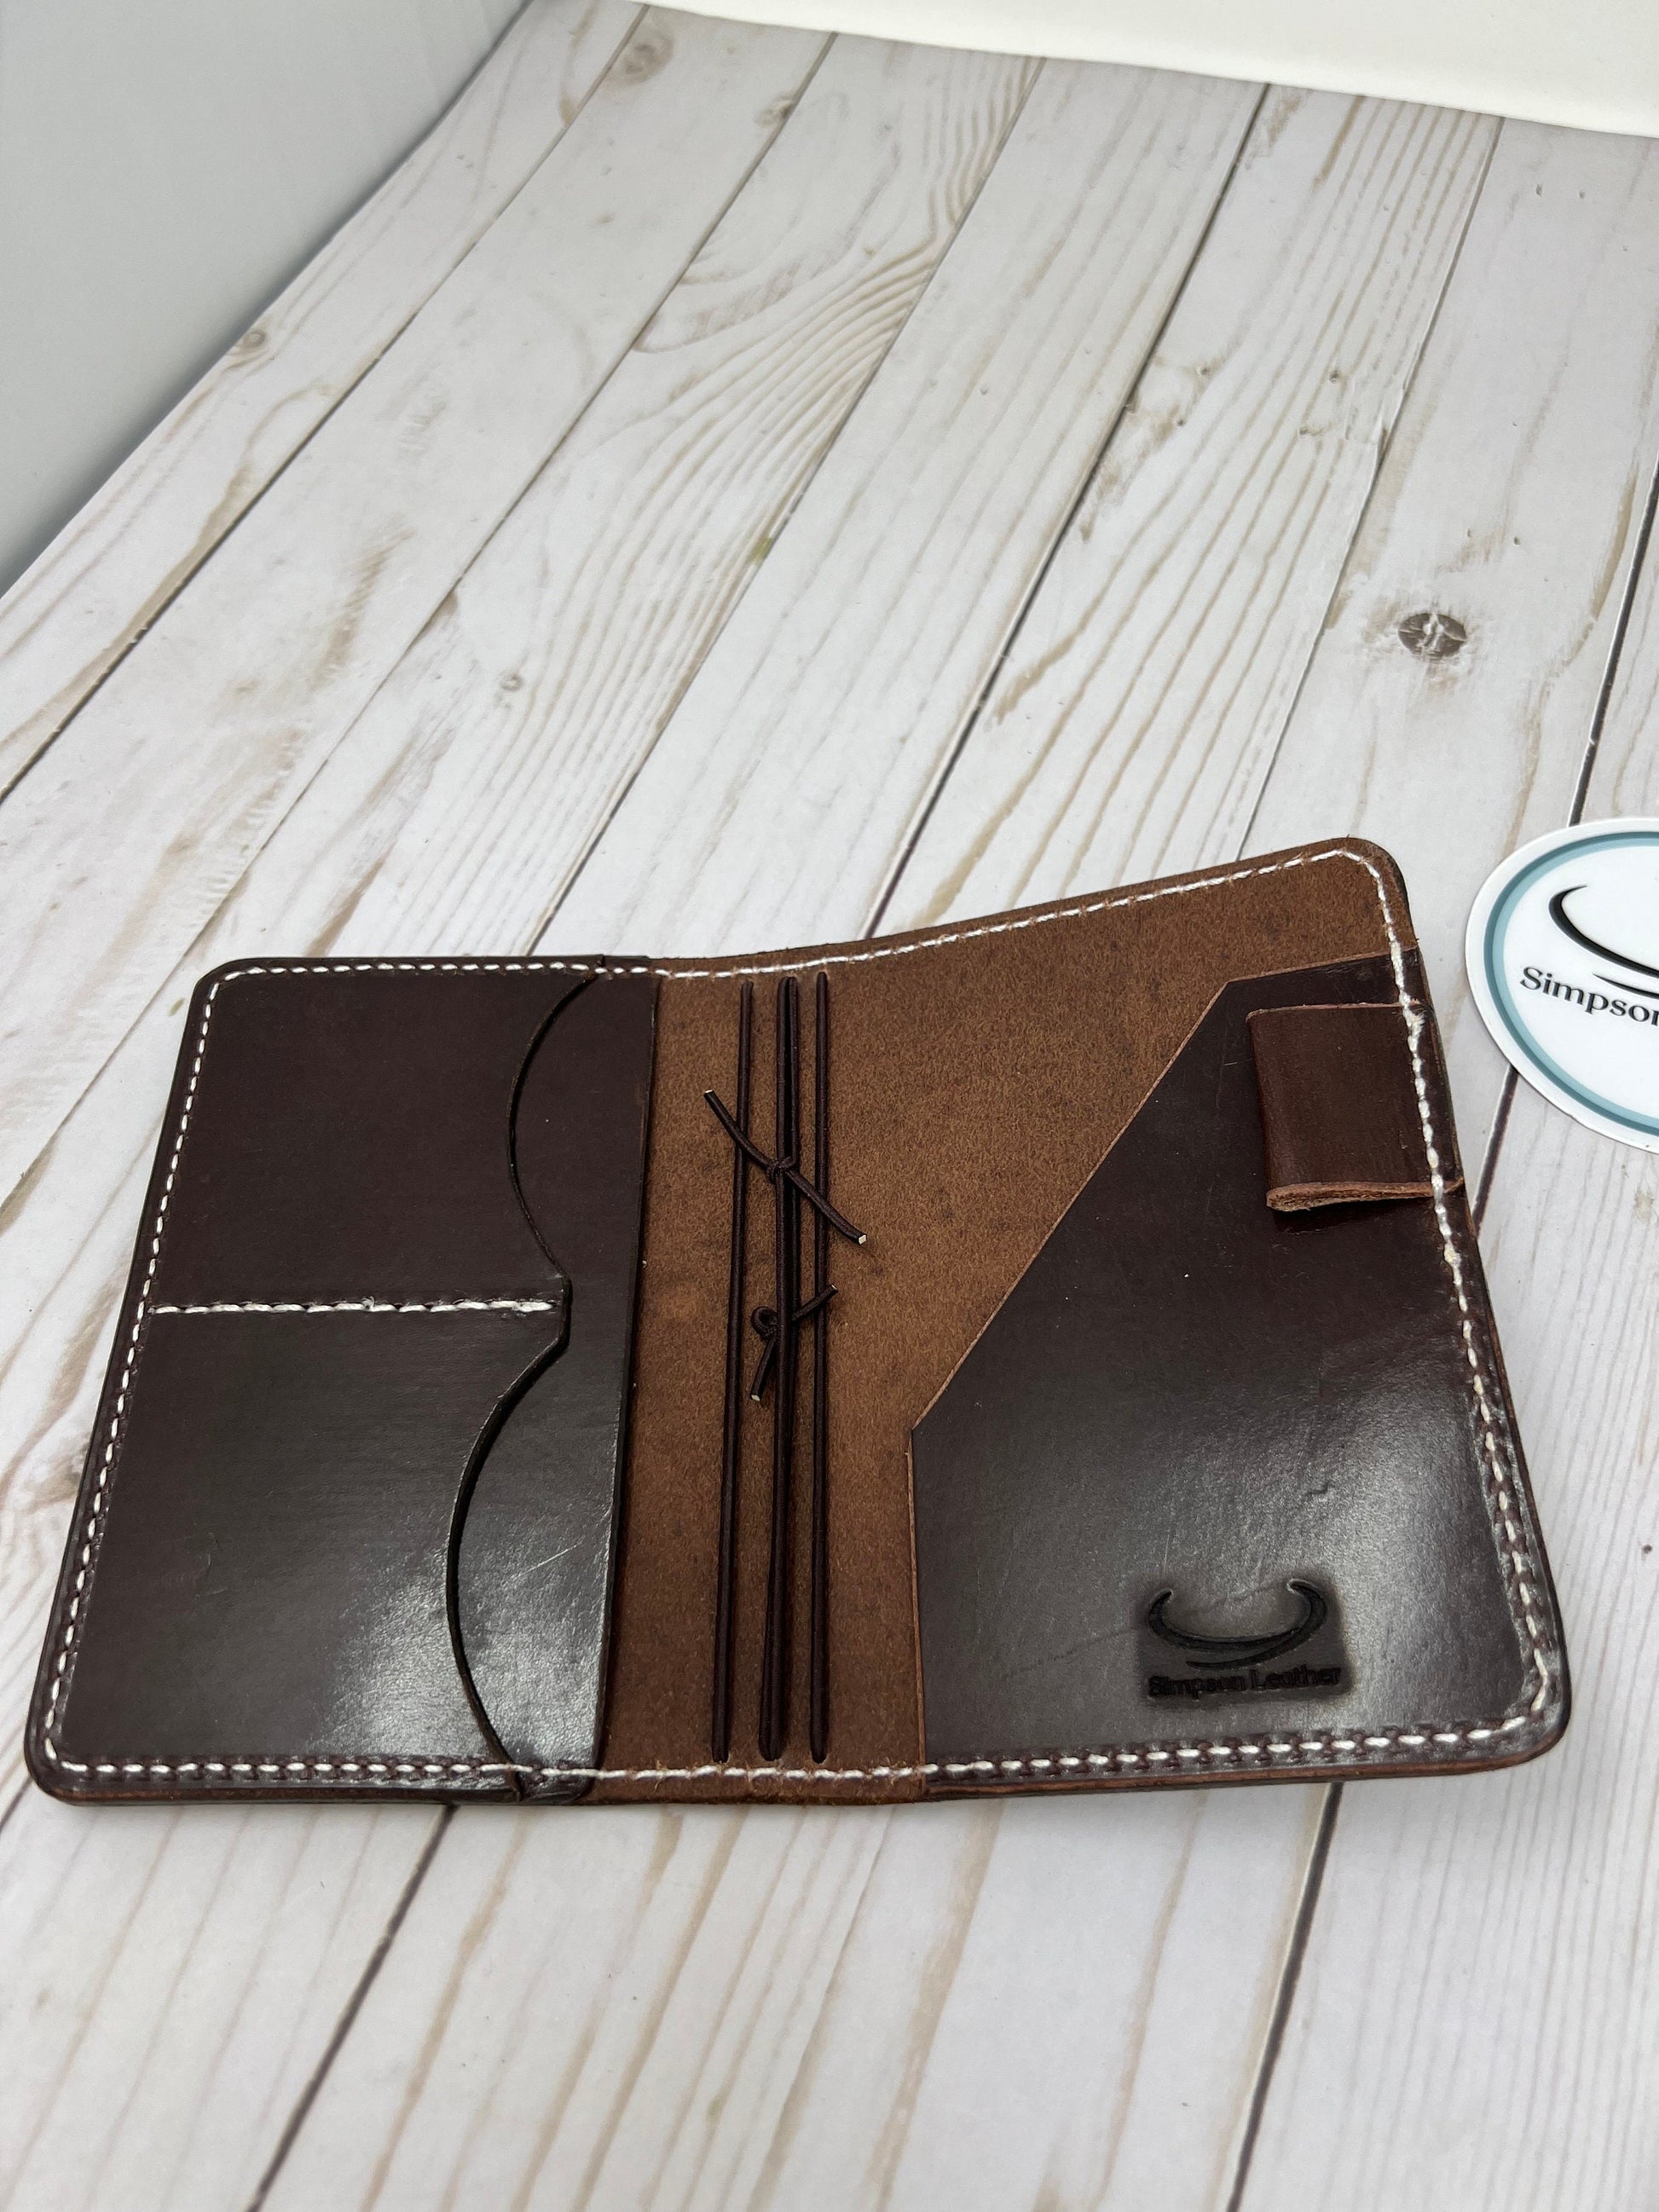 Ready to Ship Pocket Walnut Harness Deluxe Traveler's Notebook, Sized for 3.5”x5.5” inserts (sold separately)